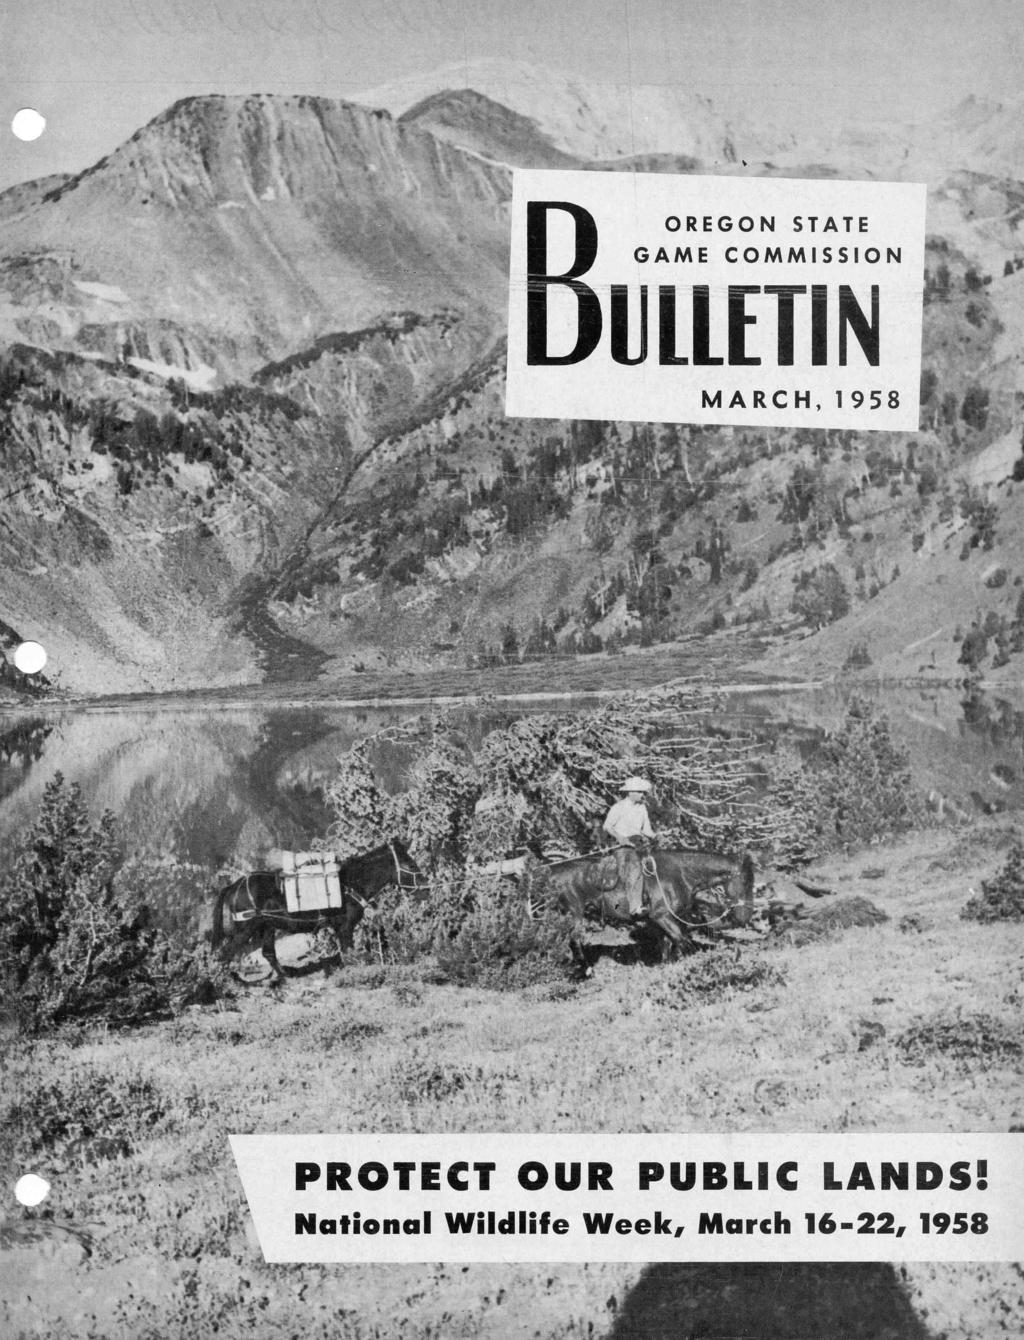 OREGON STATE GAME COMMISSION ULLETIN MARCH, 1958 PROTECT